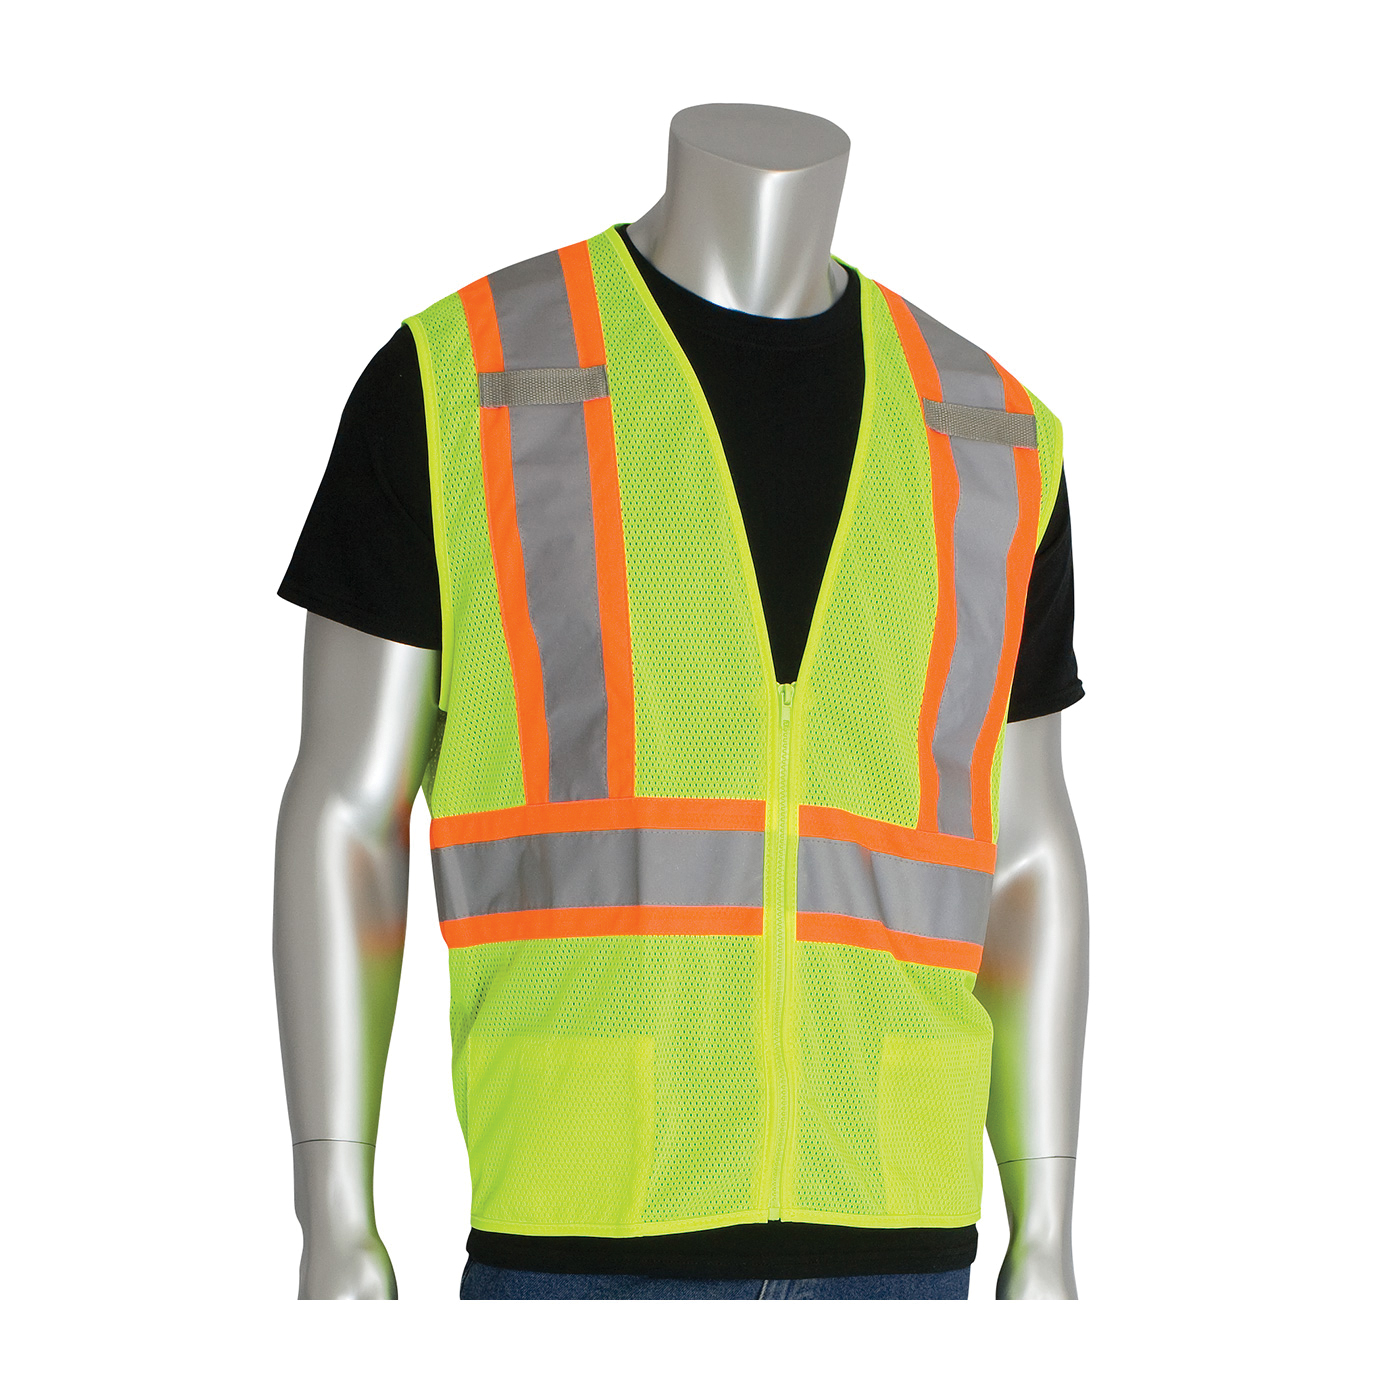 PIP® 302-0600D-LY/XL 2-Tone Safety Access Vest With "D" Ring Access, XL, Hi-Viz Lime Yellow, Polyester, Zipper Closure, 2 Pockets, ANSI Class: Class 2, Specifications Met: ANSI 107 Type R